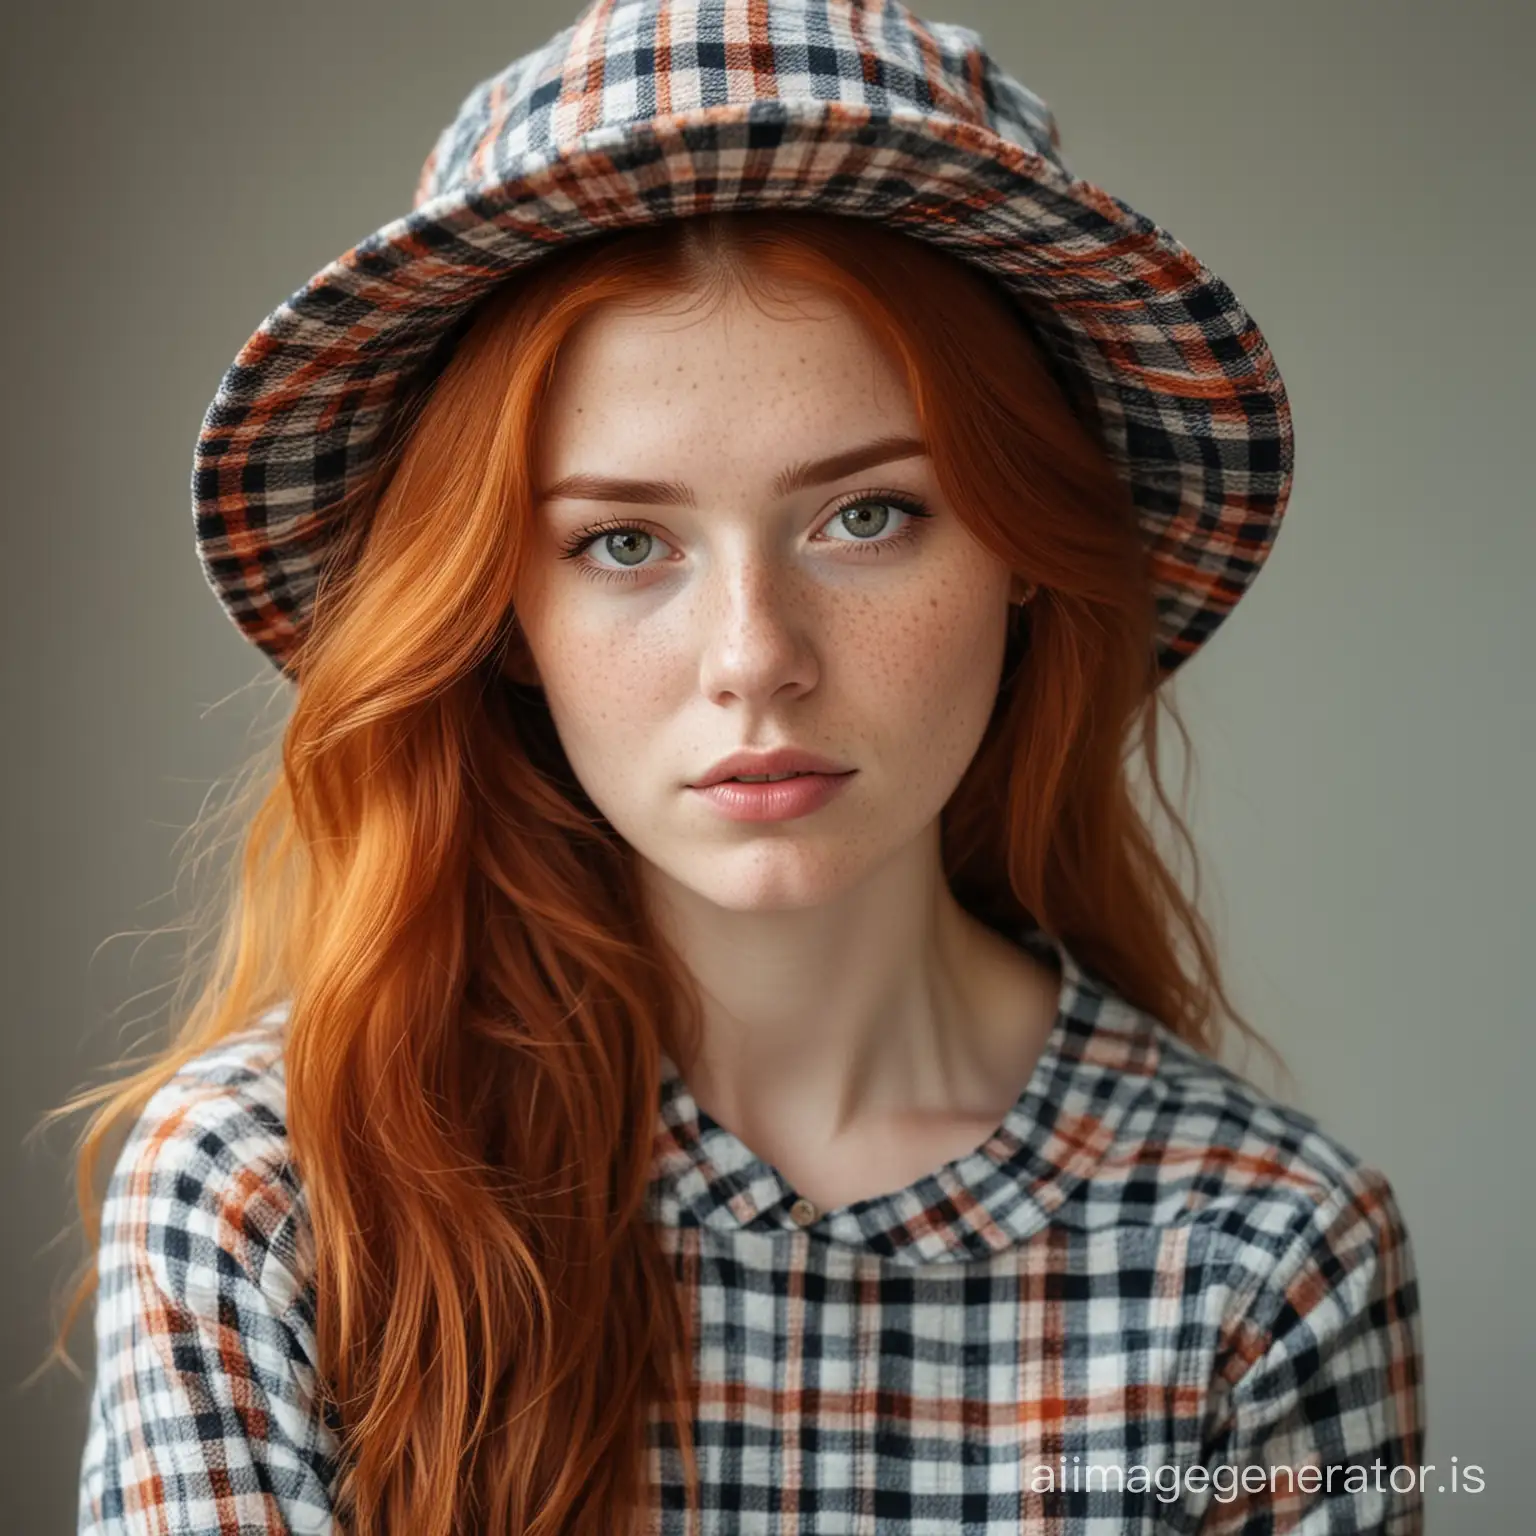 Cheerful-RedHaired-Girl-in-Plaid-Dress-and-Hat-with-Freckles